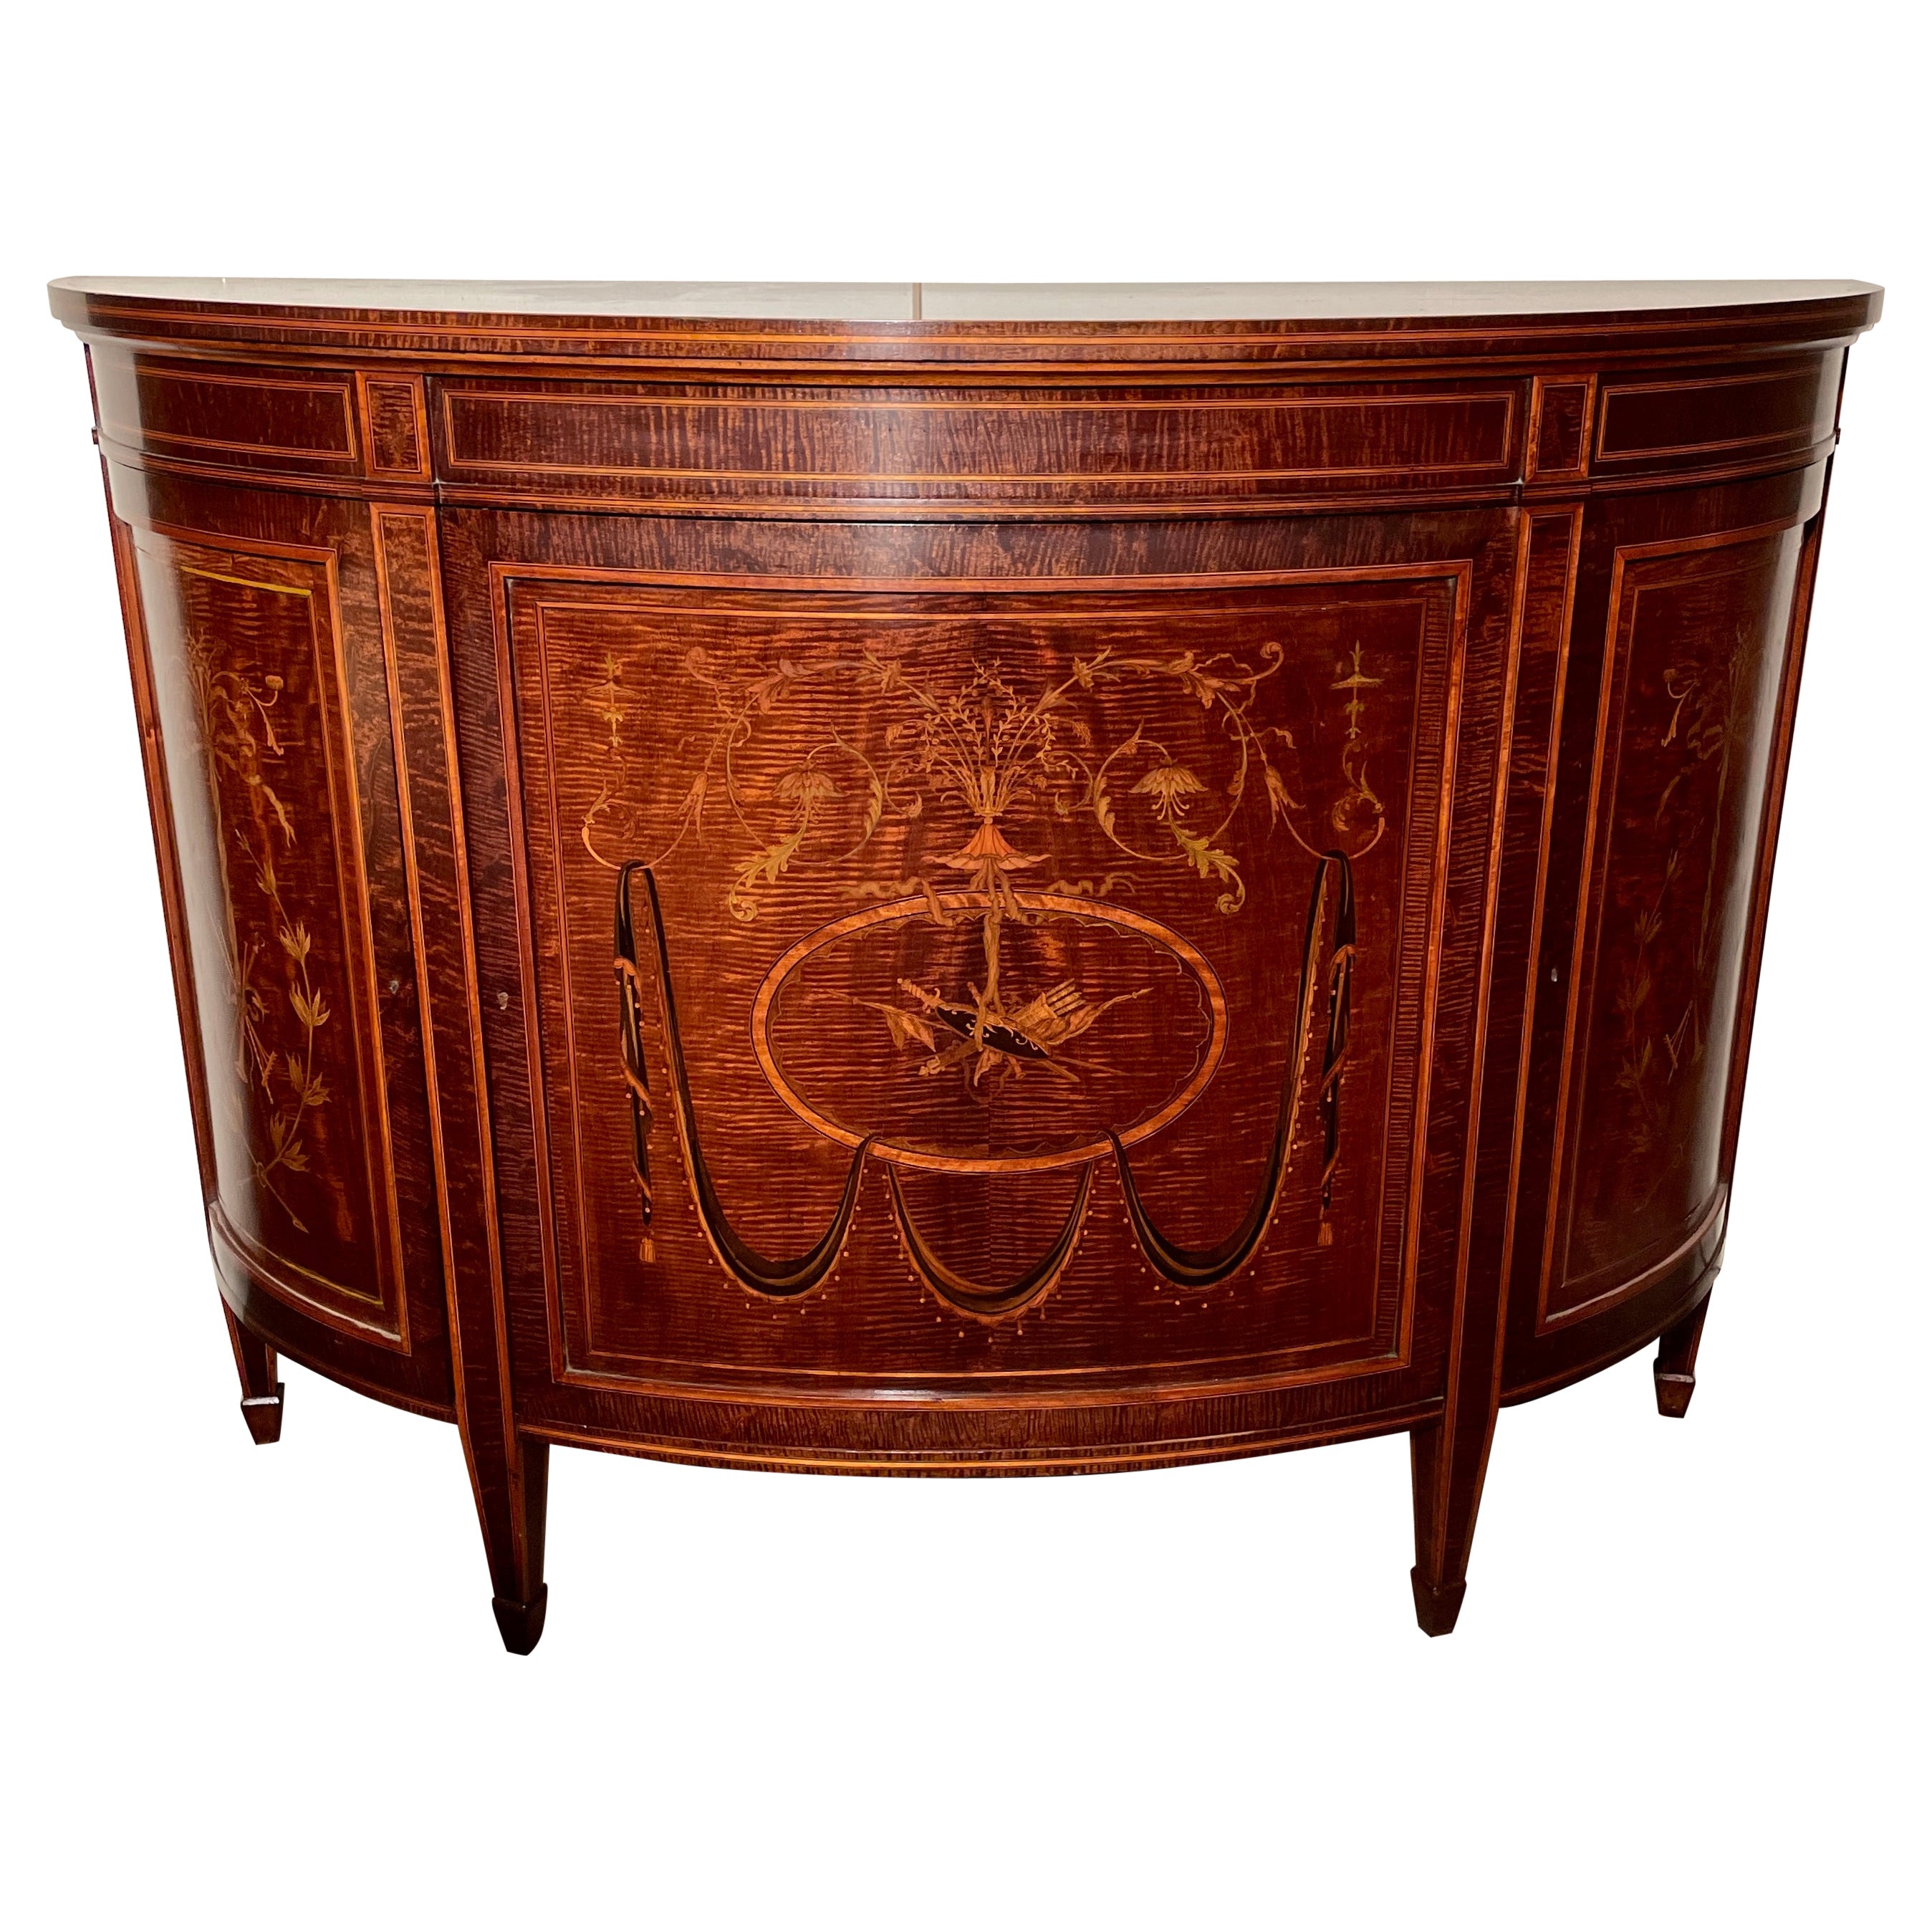 Antique English "Druce & Co., London" Mahogany with Inlay Demi-Lune Sideboard